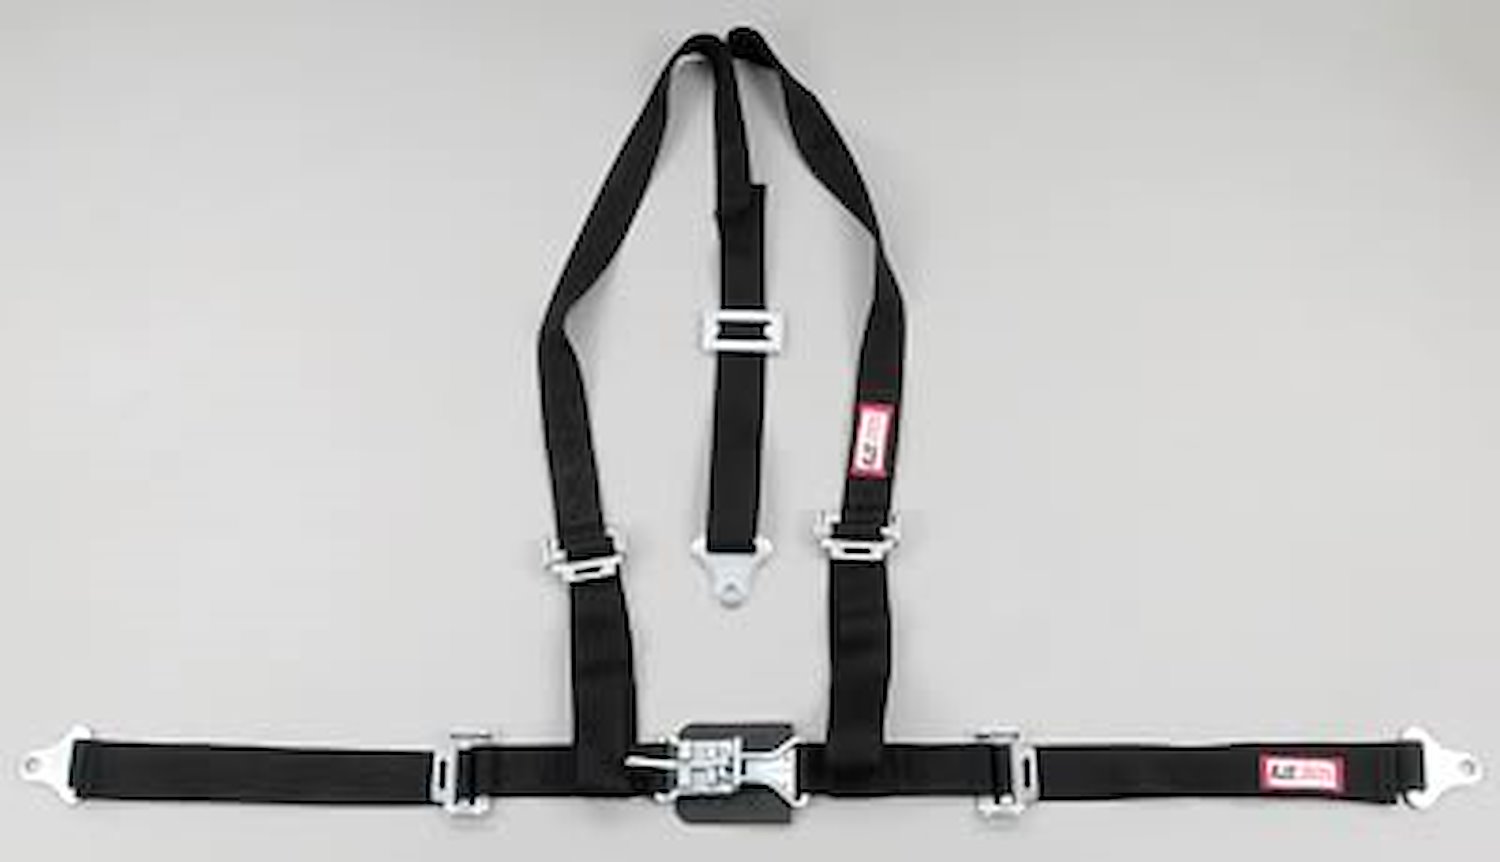 NON-SFI L&L HARNESS 3 PULL UP Lap Belt SEWN IN 2 S.H. Individual ROLL BAR Mount w/STERNUM STRAP ALL WRAP ENDS RED